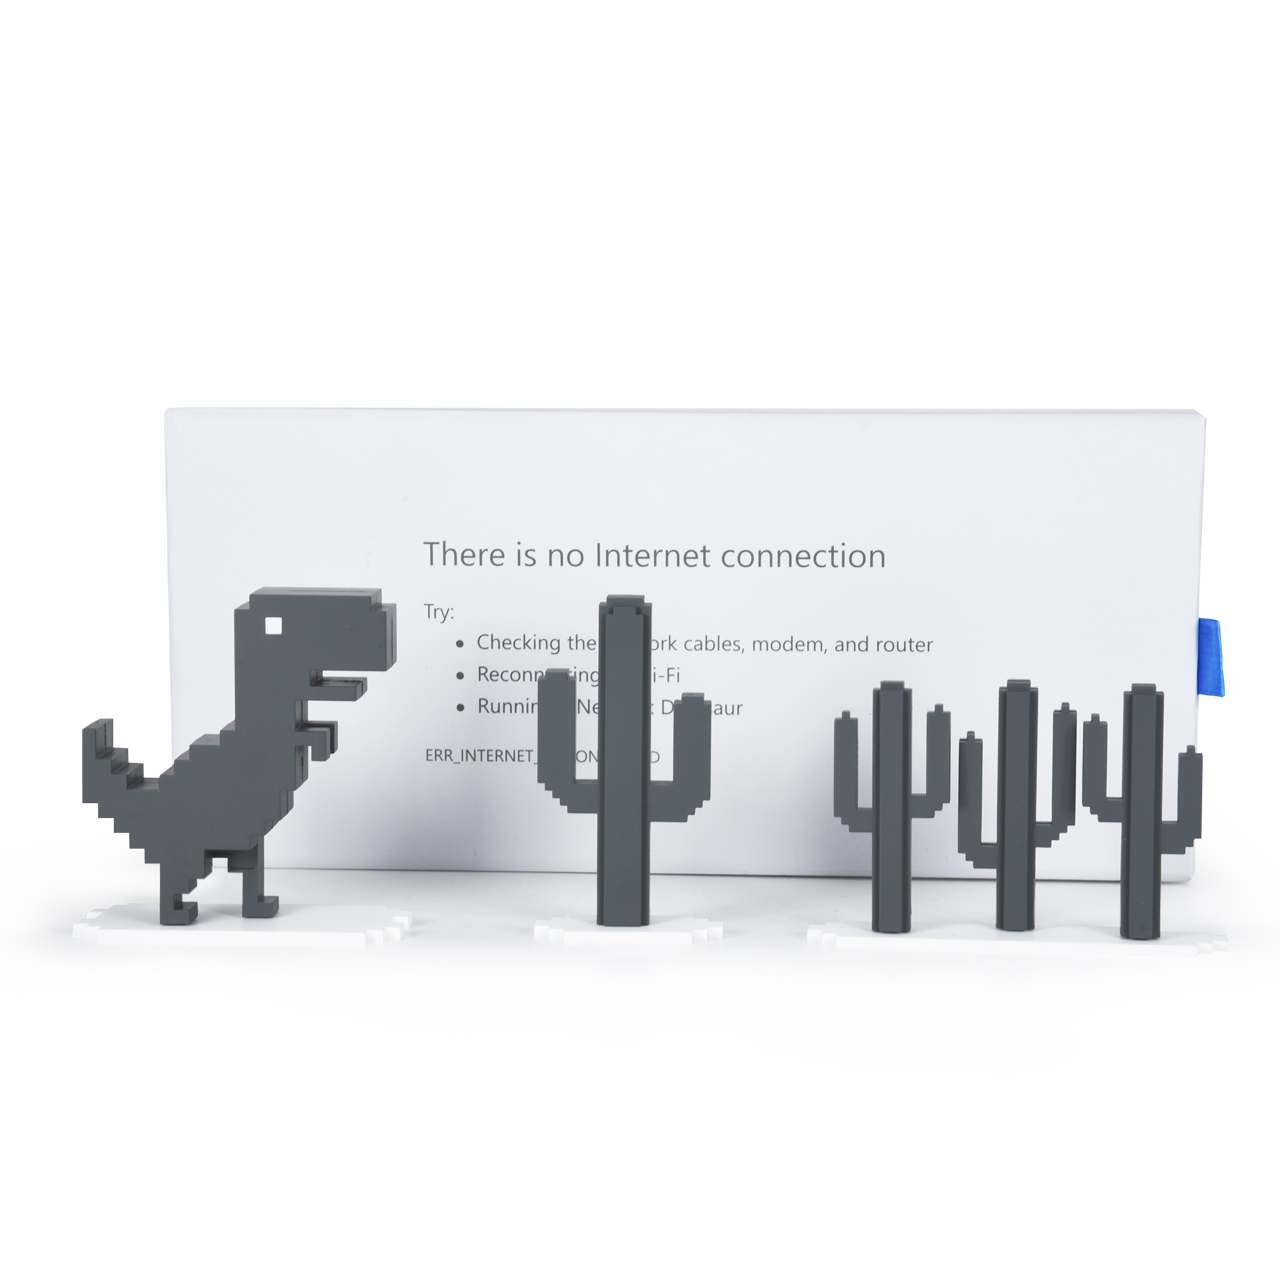 On the Chrome Dino games Google has added mini games related to I